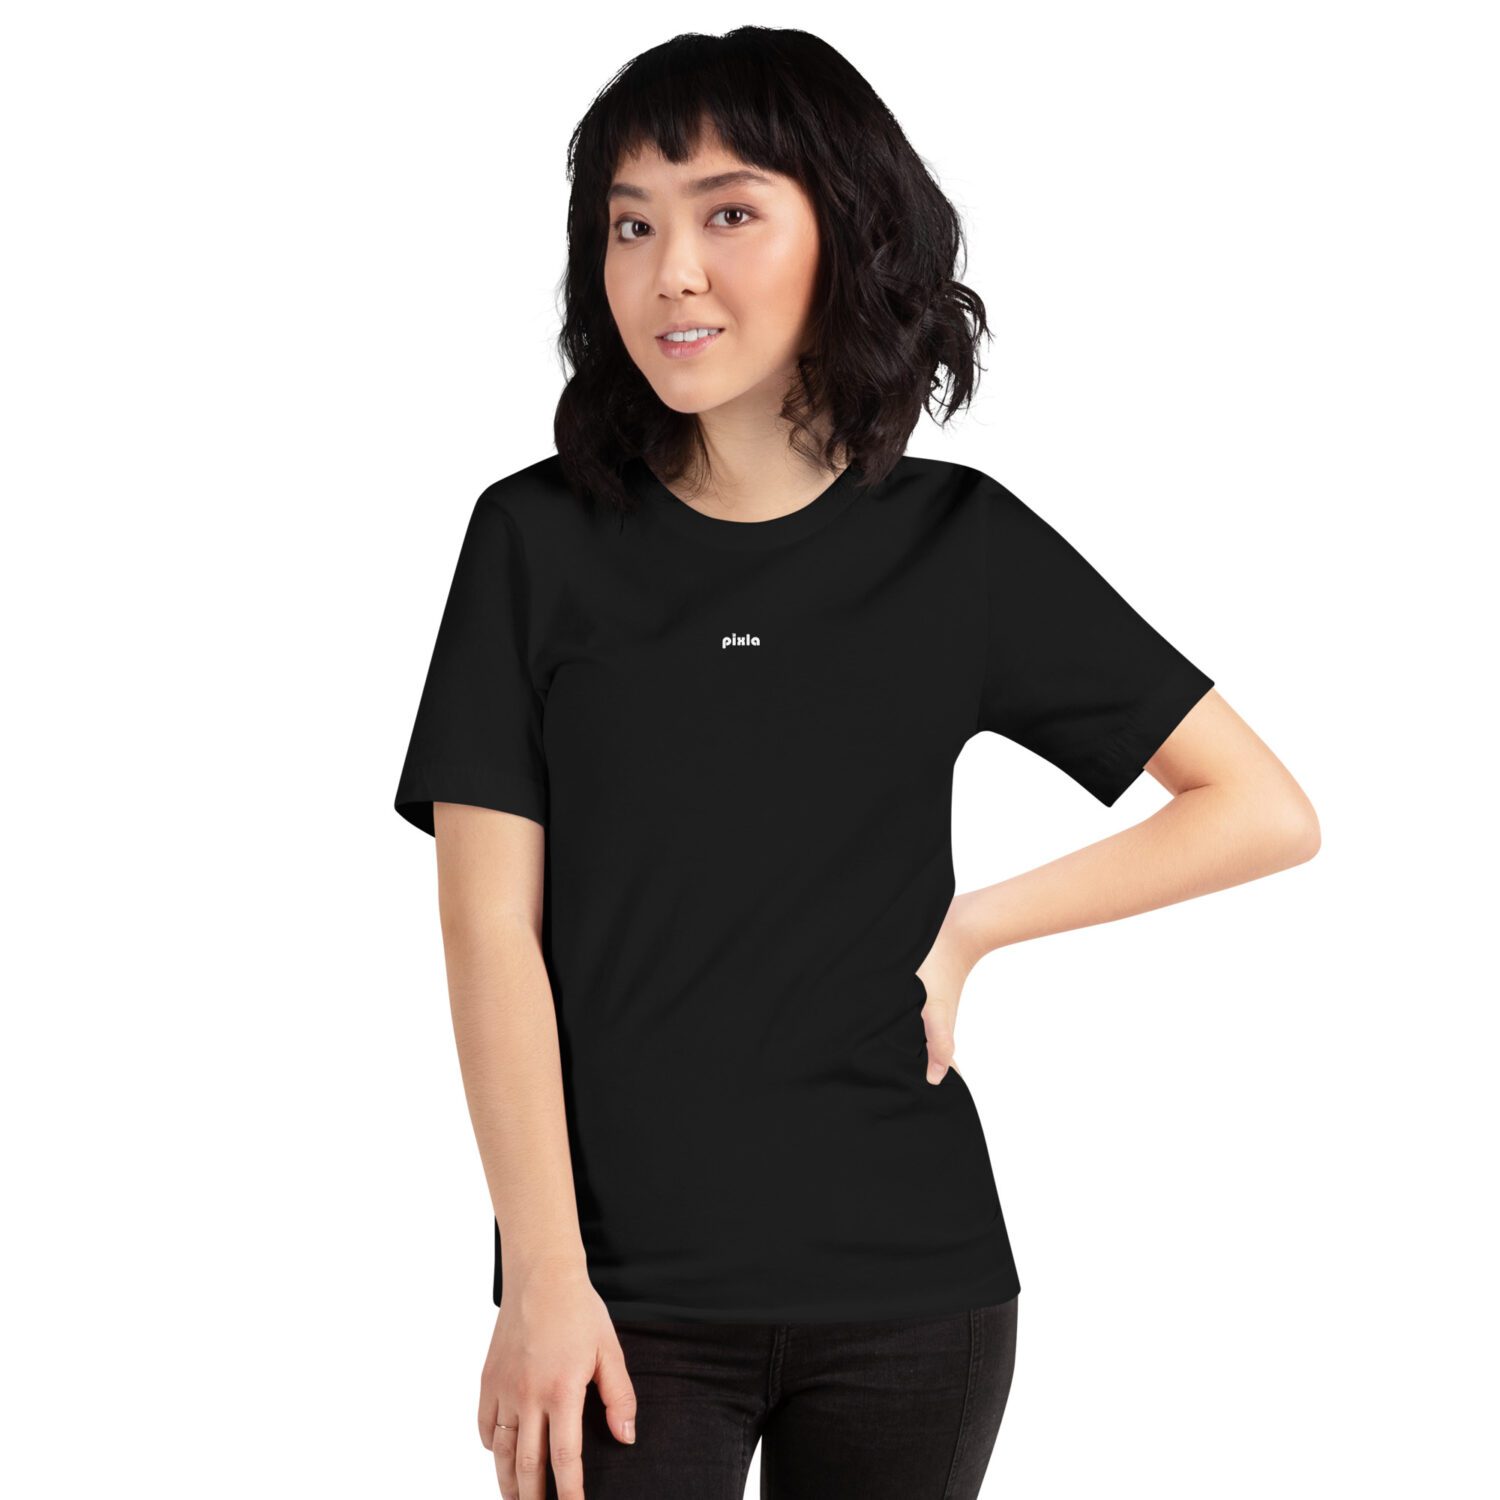 Soft and medium to lightweight white t-shirt with just the right amount of stretch without losing structure. It’s comfortable and flattering and comes with a royal blue print on the upper back and a logo on the front.